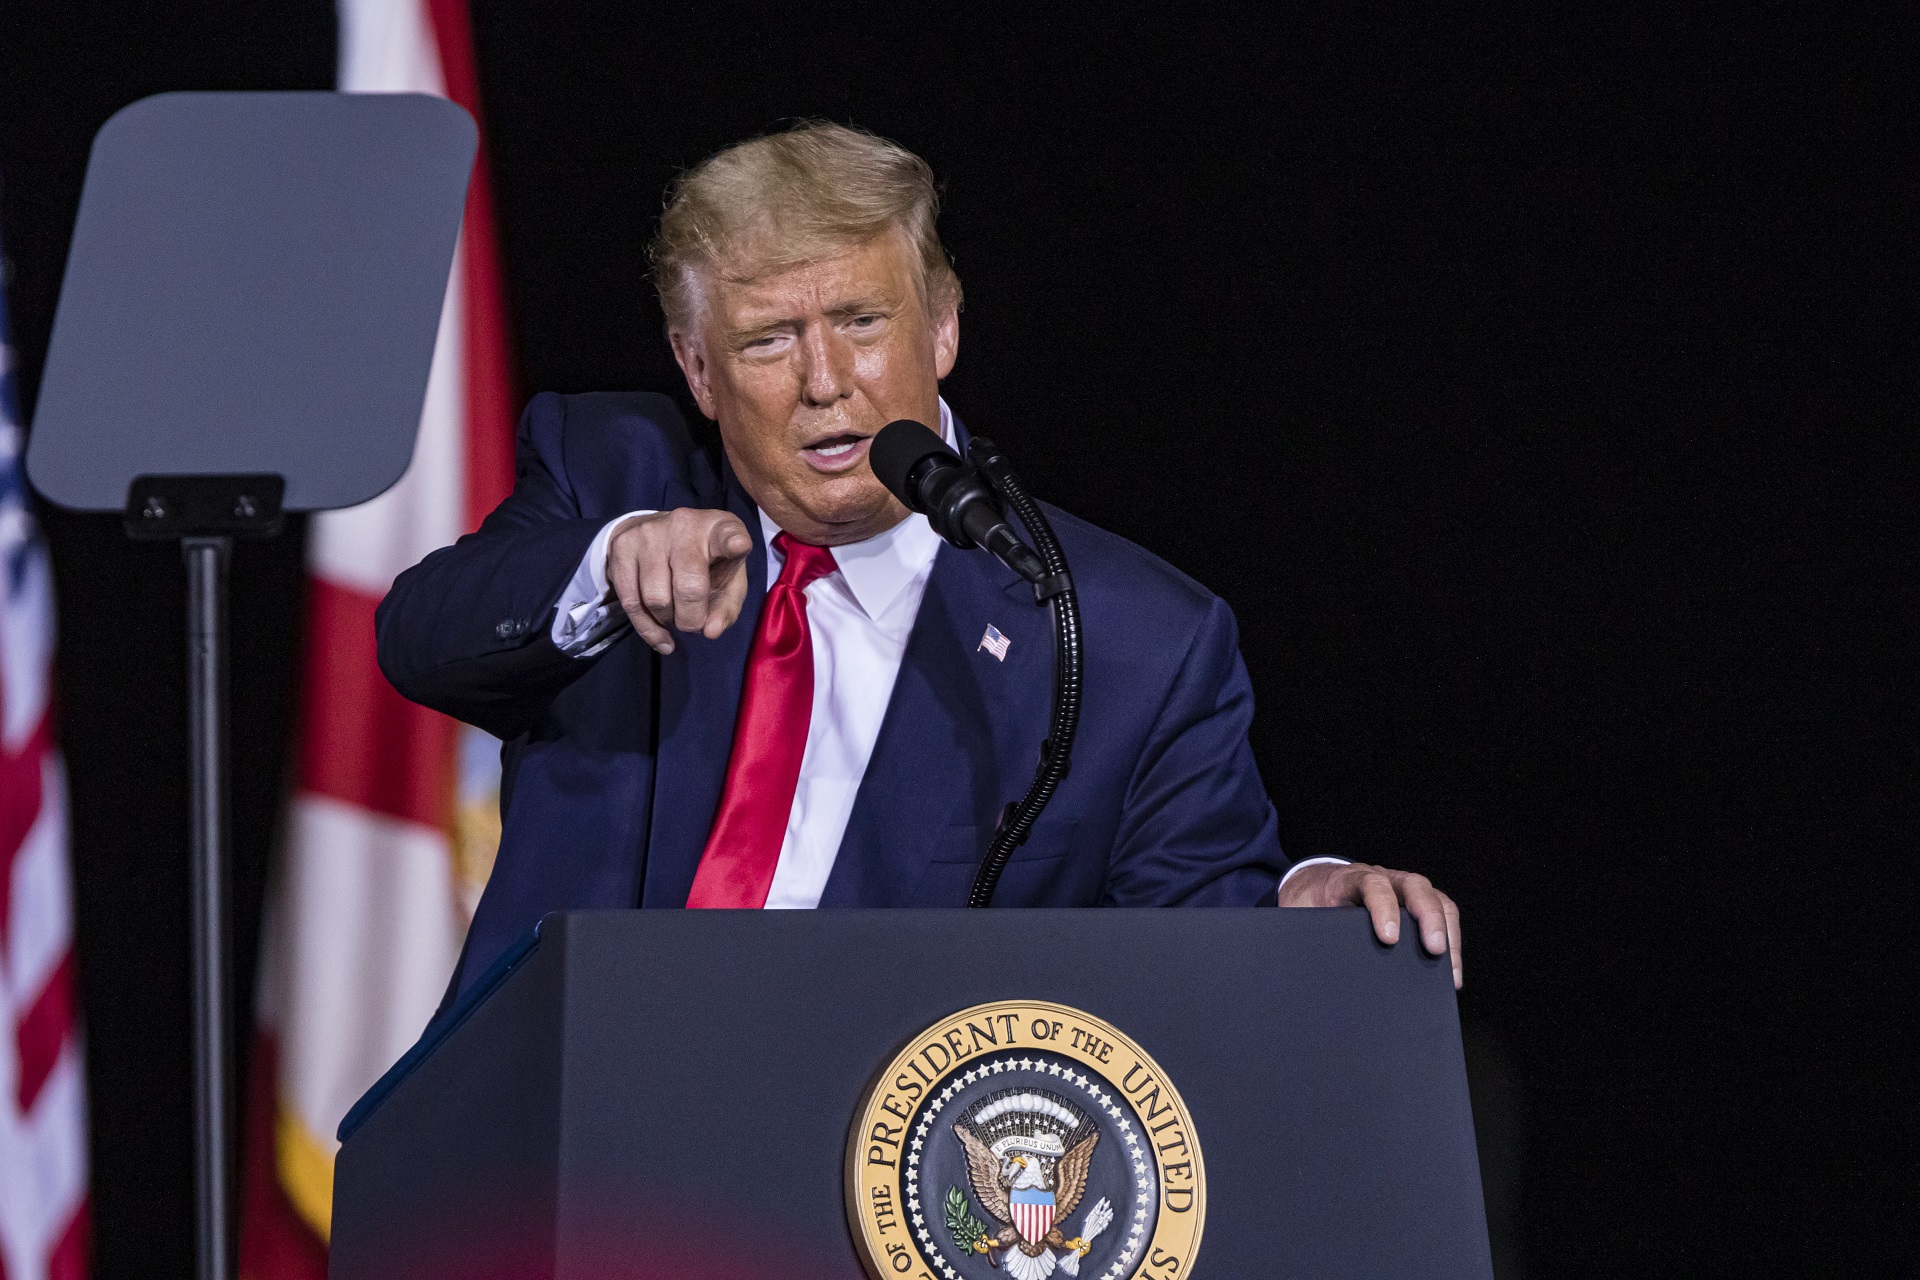 epa08769300 US President Donald J. Trump speaks during a campaign rally in Pensacola, Florida, USA,  23 October 2020. The United States will hold its presidential election on 03 November 2020.  EPA/DAN ANDERSON